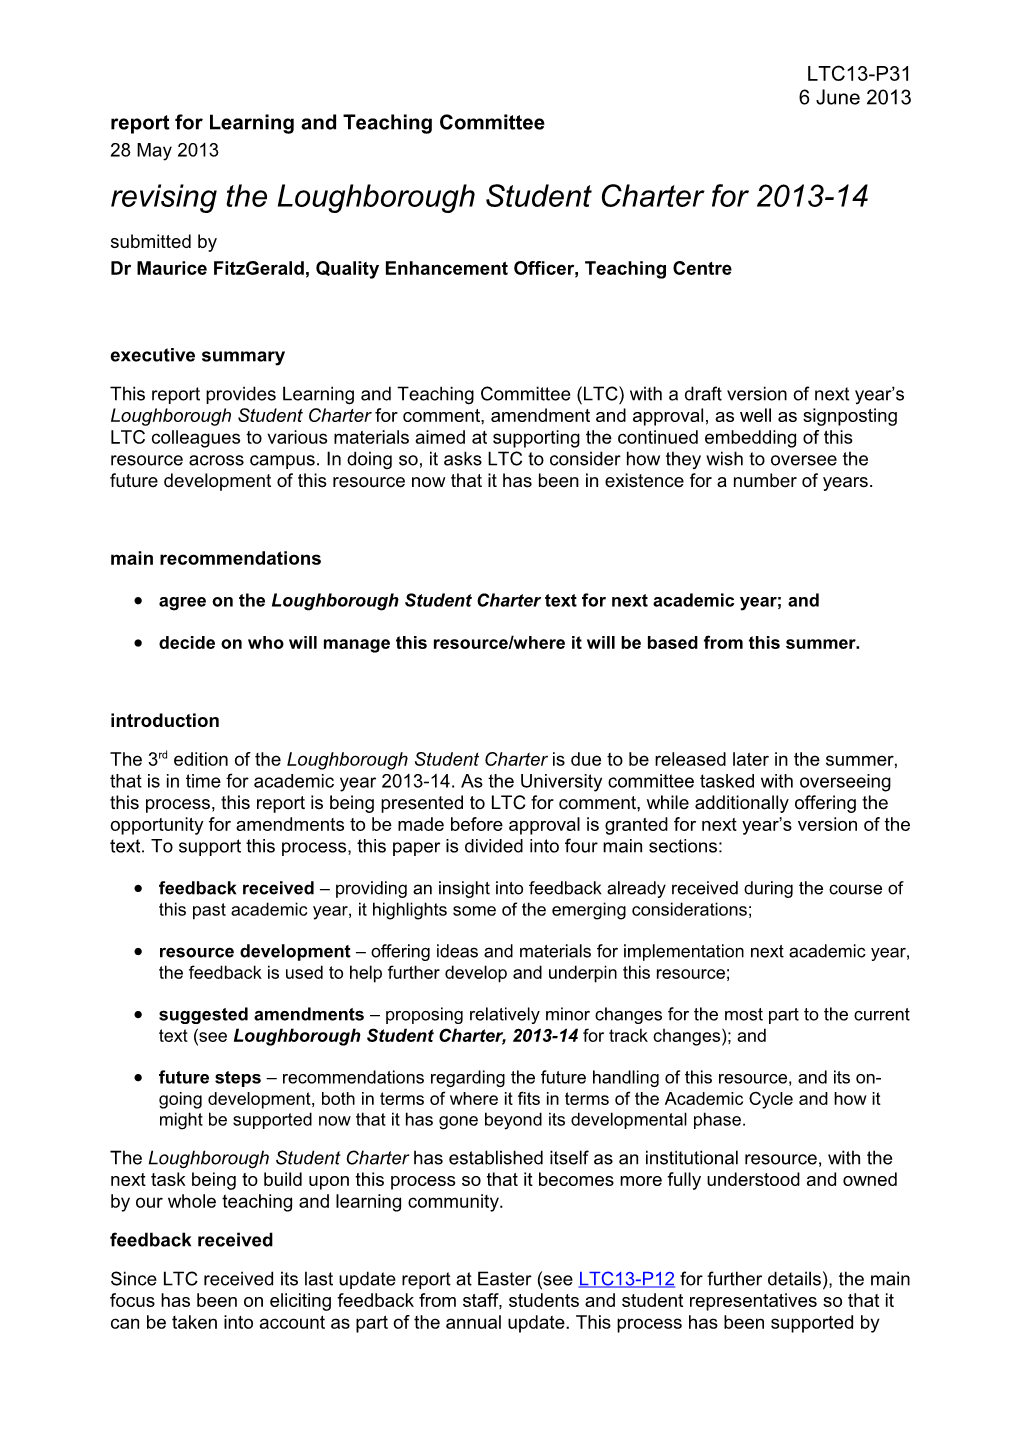 Report for Learning and Teaching Committee